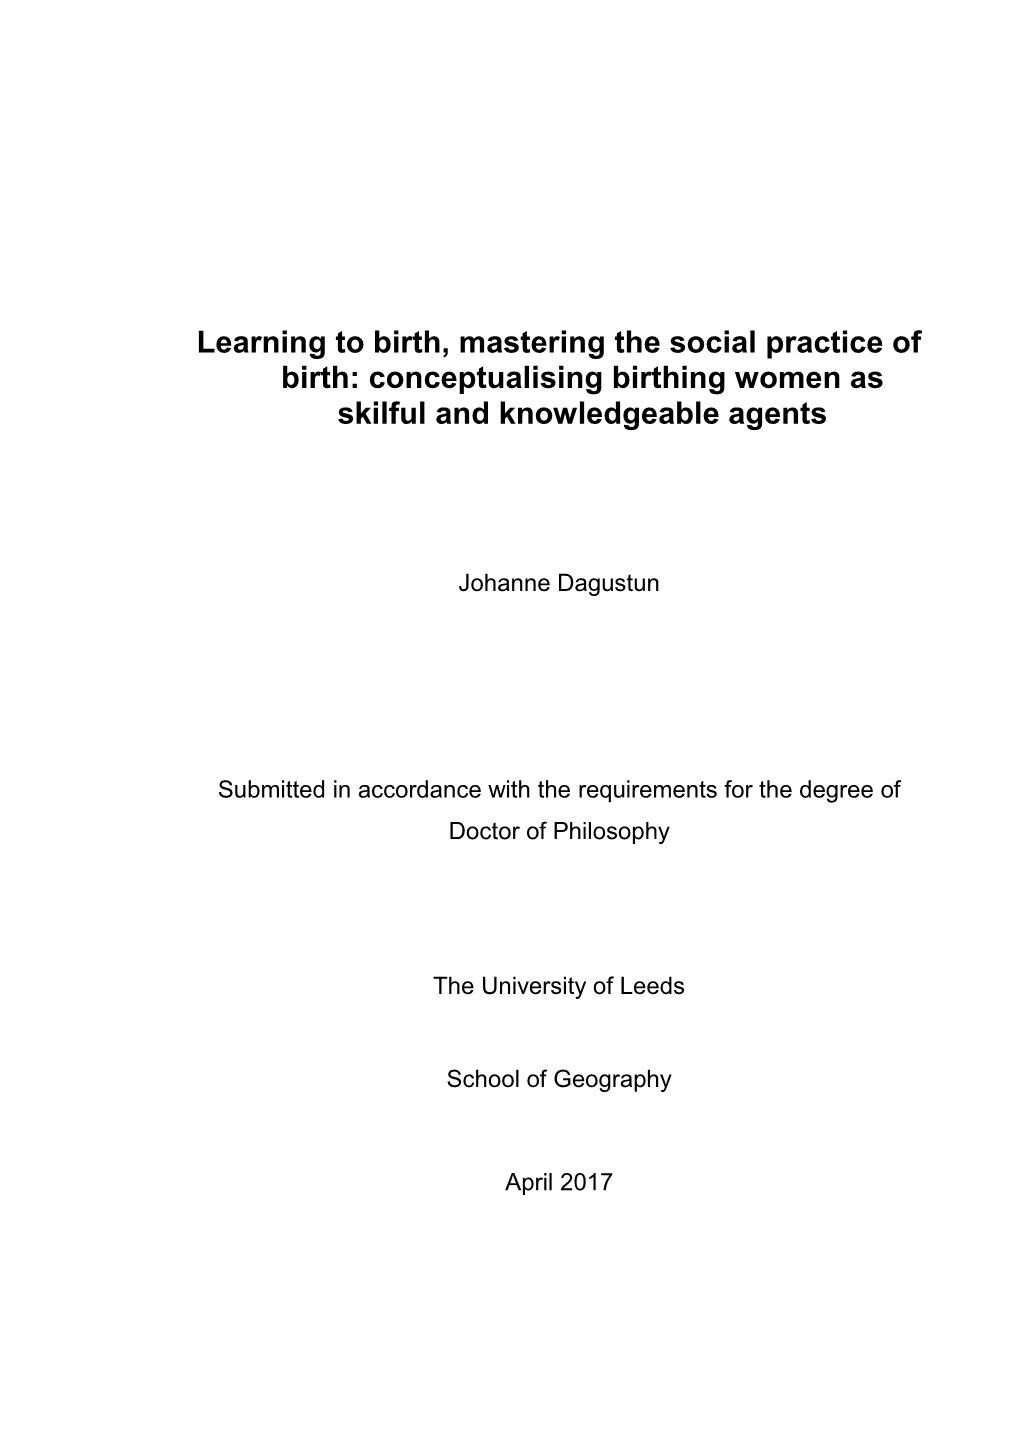 Learning to Birth, Mastering the Social Practice of Birth: Conceptualising Birthing Women As Skilful and Knowledgeable Agents